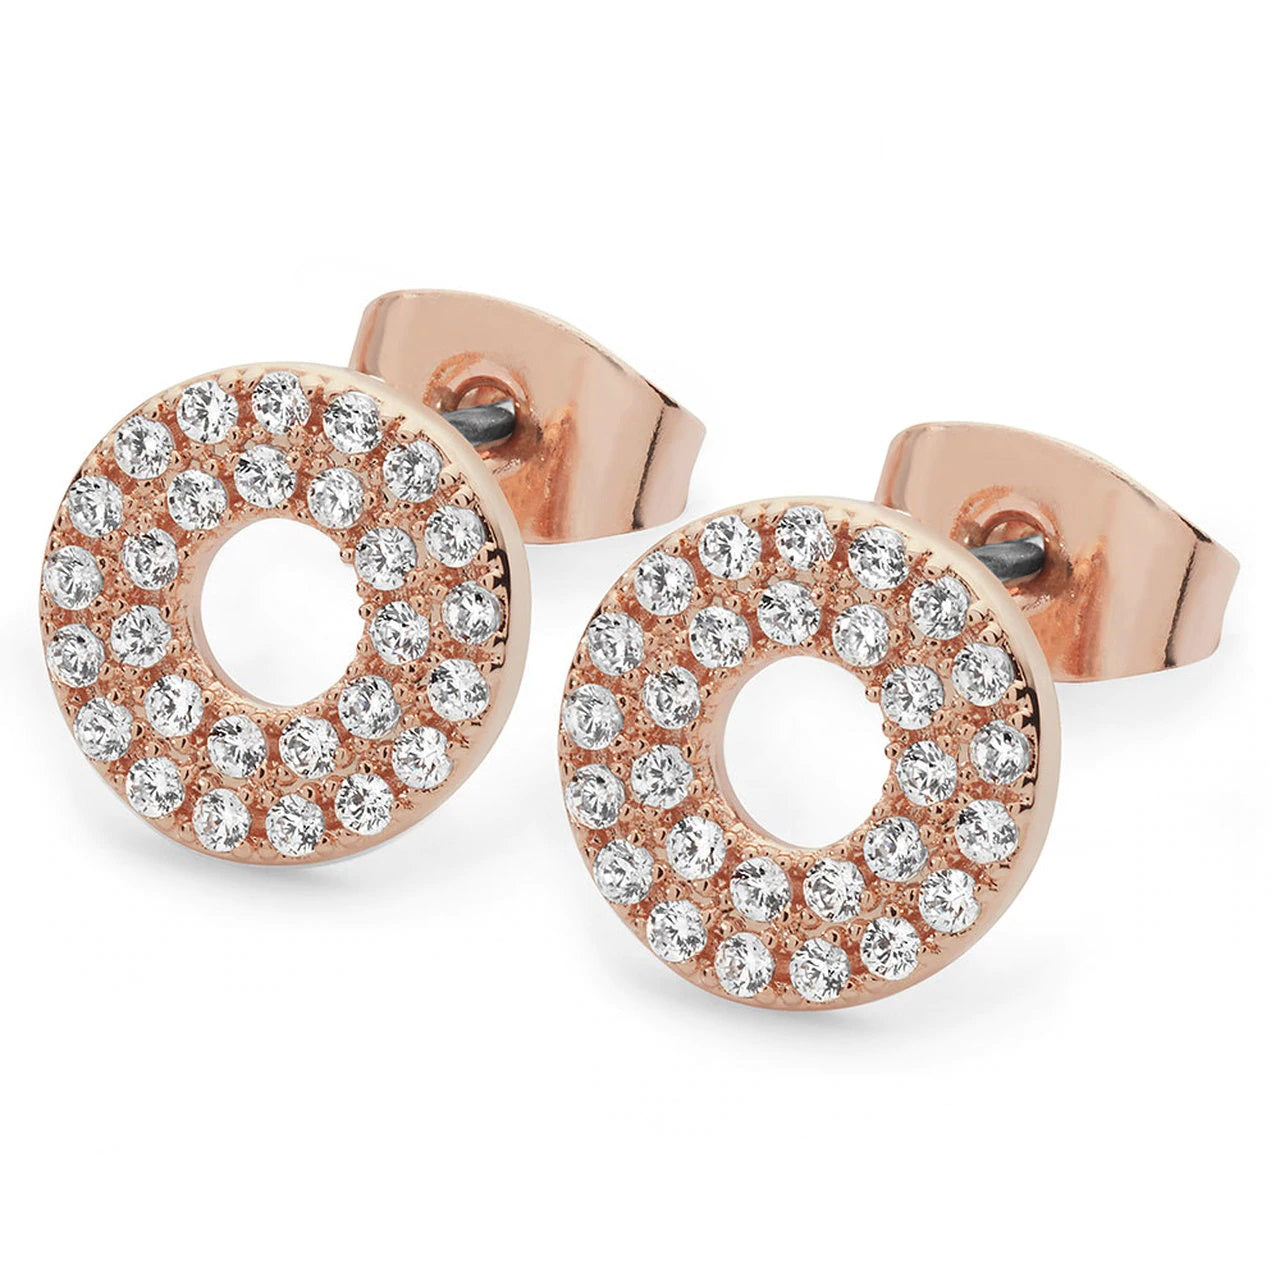 Tipperary Crystal Pave Triple Band Moon Earrings Rose Gold  Simple yet elegantly dazzling these clear stone circular stud earrings are the perfect partner to our triple band moon pendant.  These earrings are protected with an anti tarnish coating and comes presented in a beautiful gift box with ribbon. The earrings are from our Moon Collection.